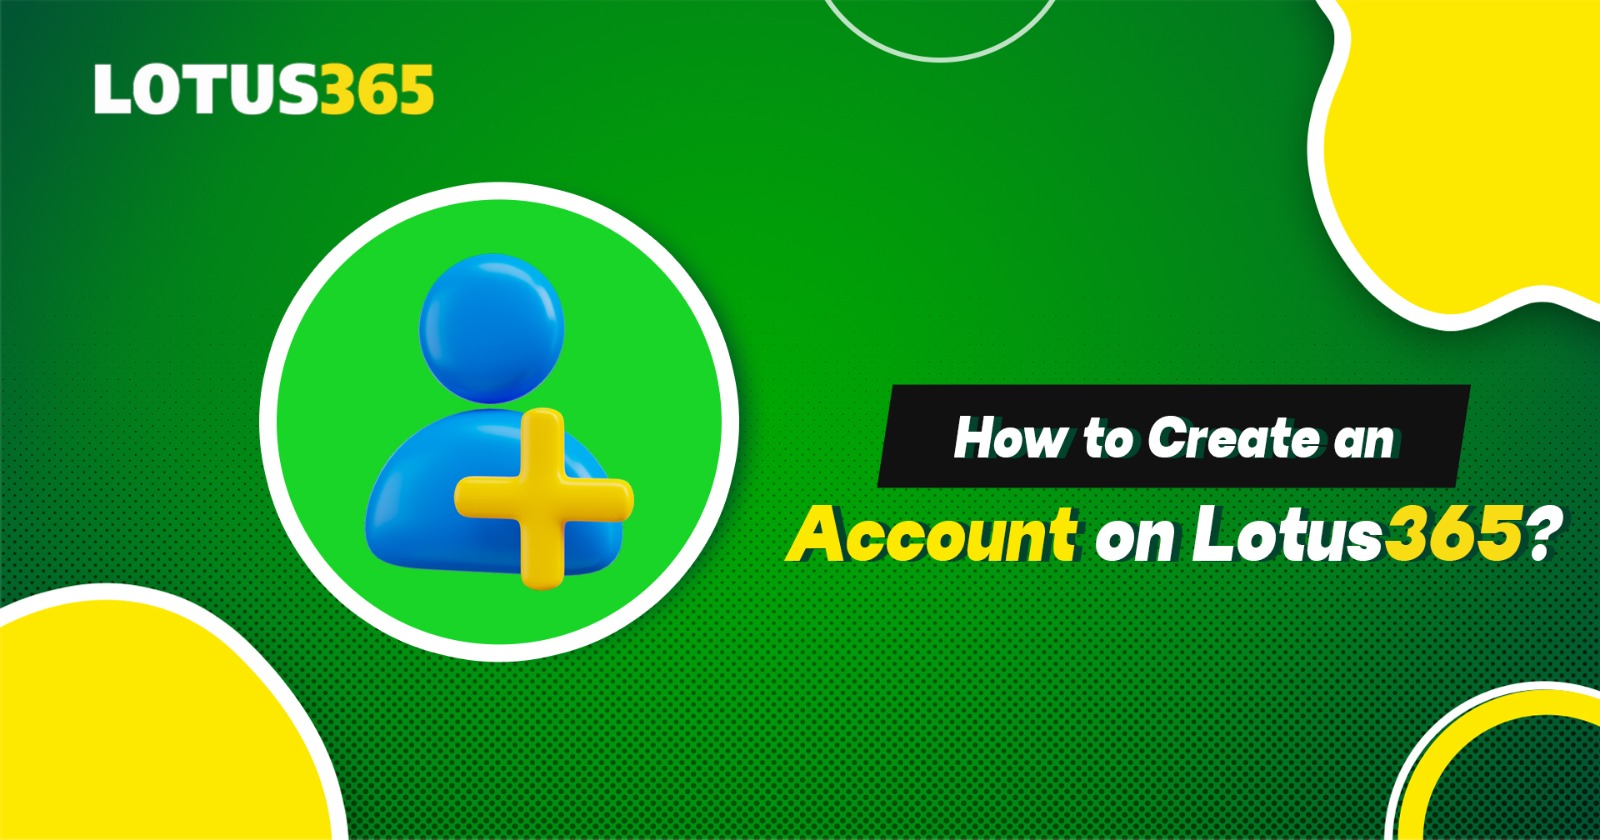 How to Create an Account on Lotus365